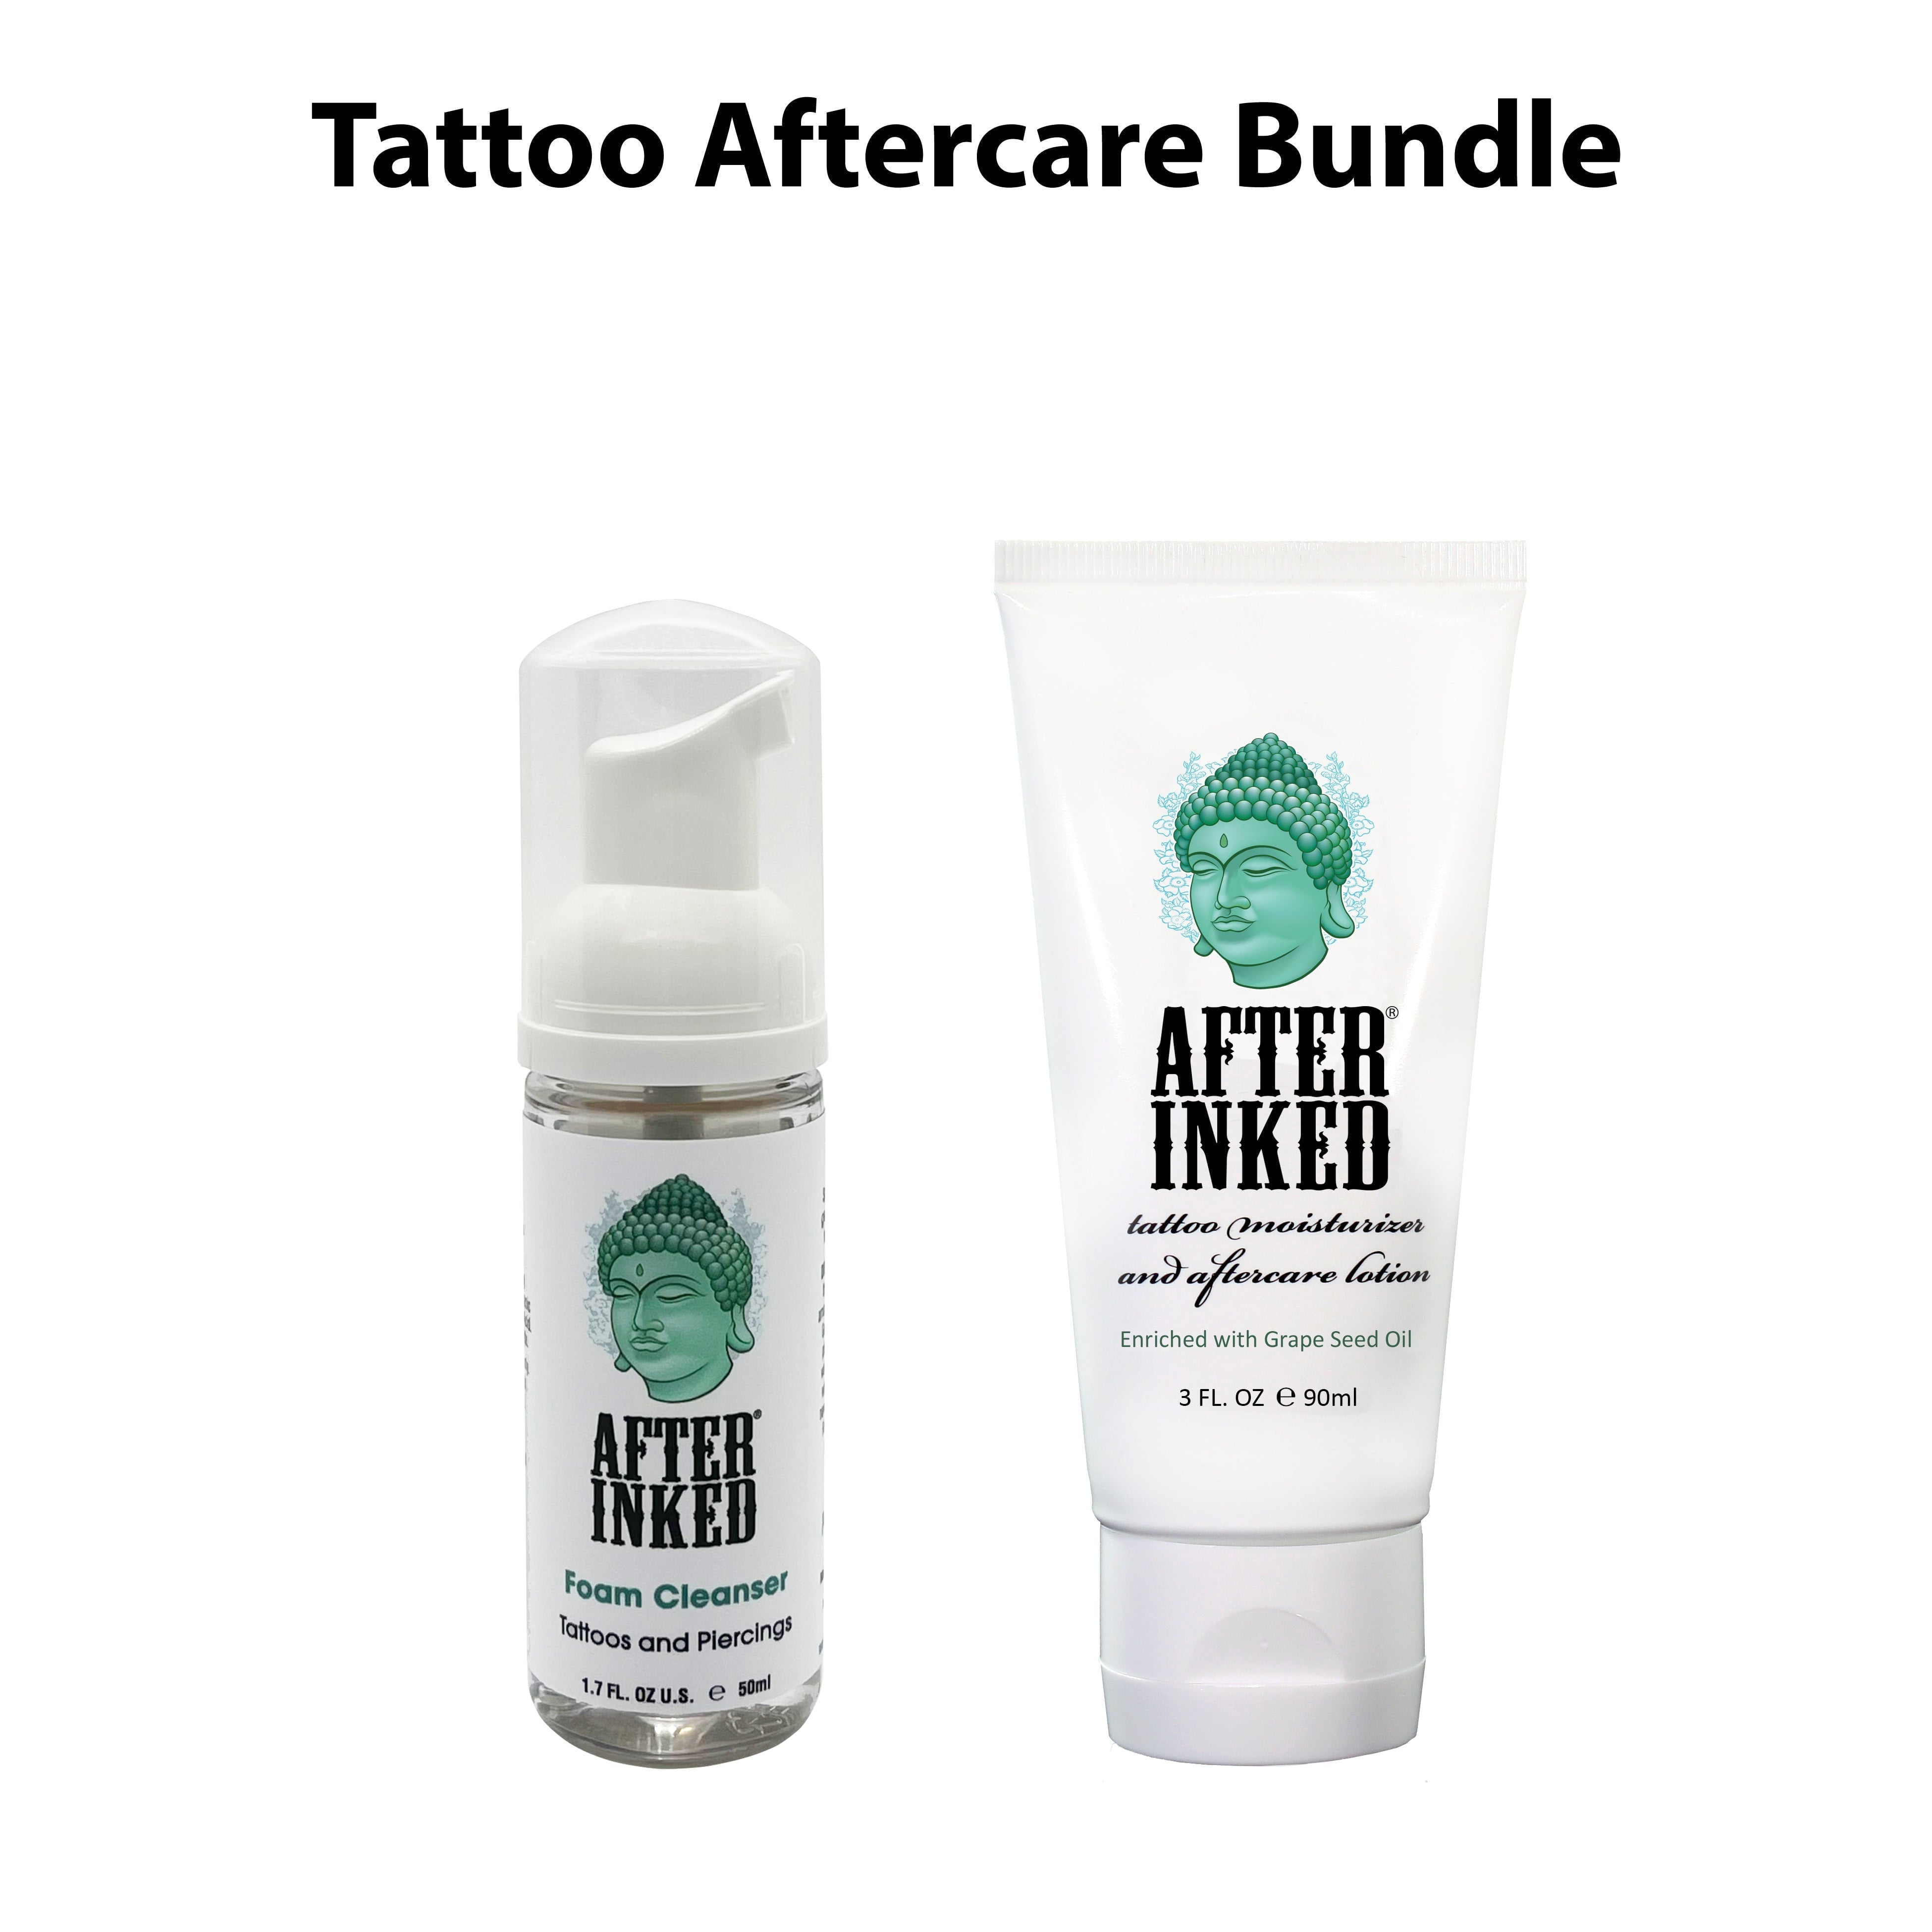 15 Best Tattoo Lotions and Creams for a Great Looking Tattoo  Skincarecom